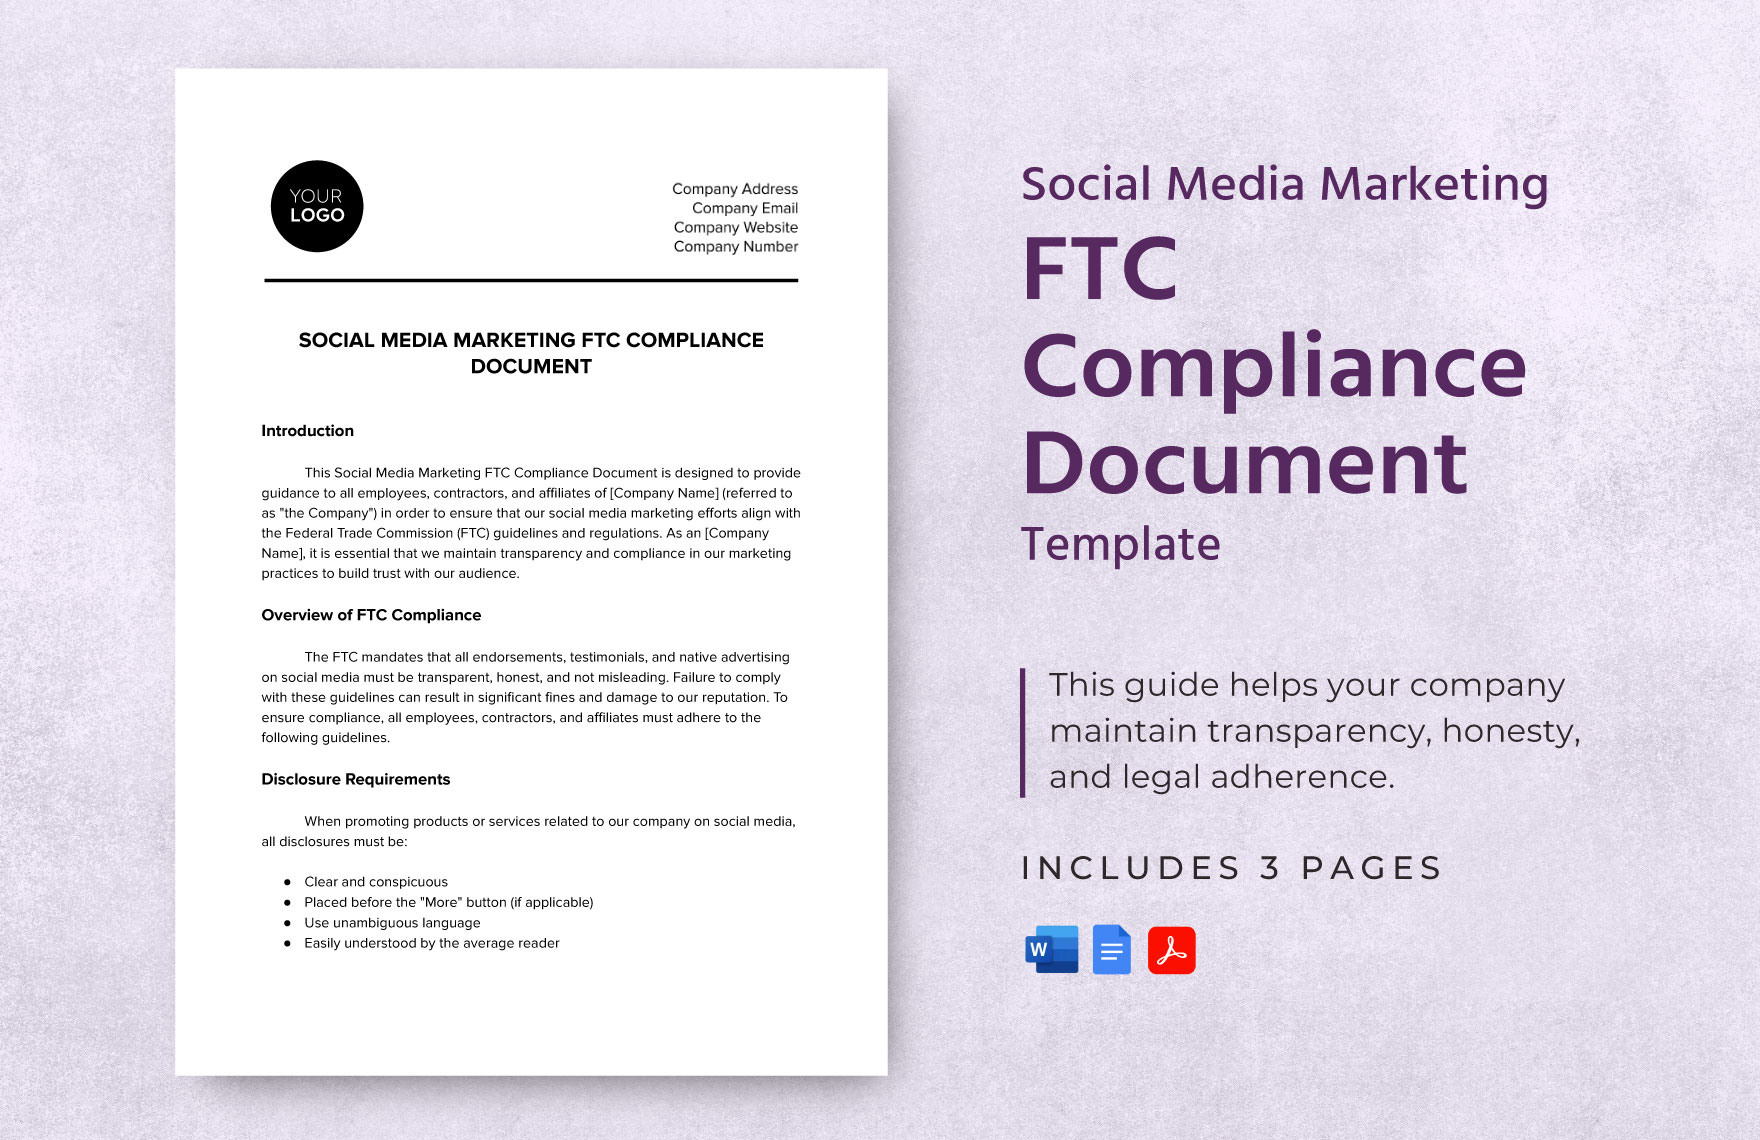 Social Media Marketing FTC Compliance Document Template in Word, Google Docs, PDF